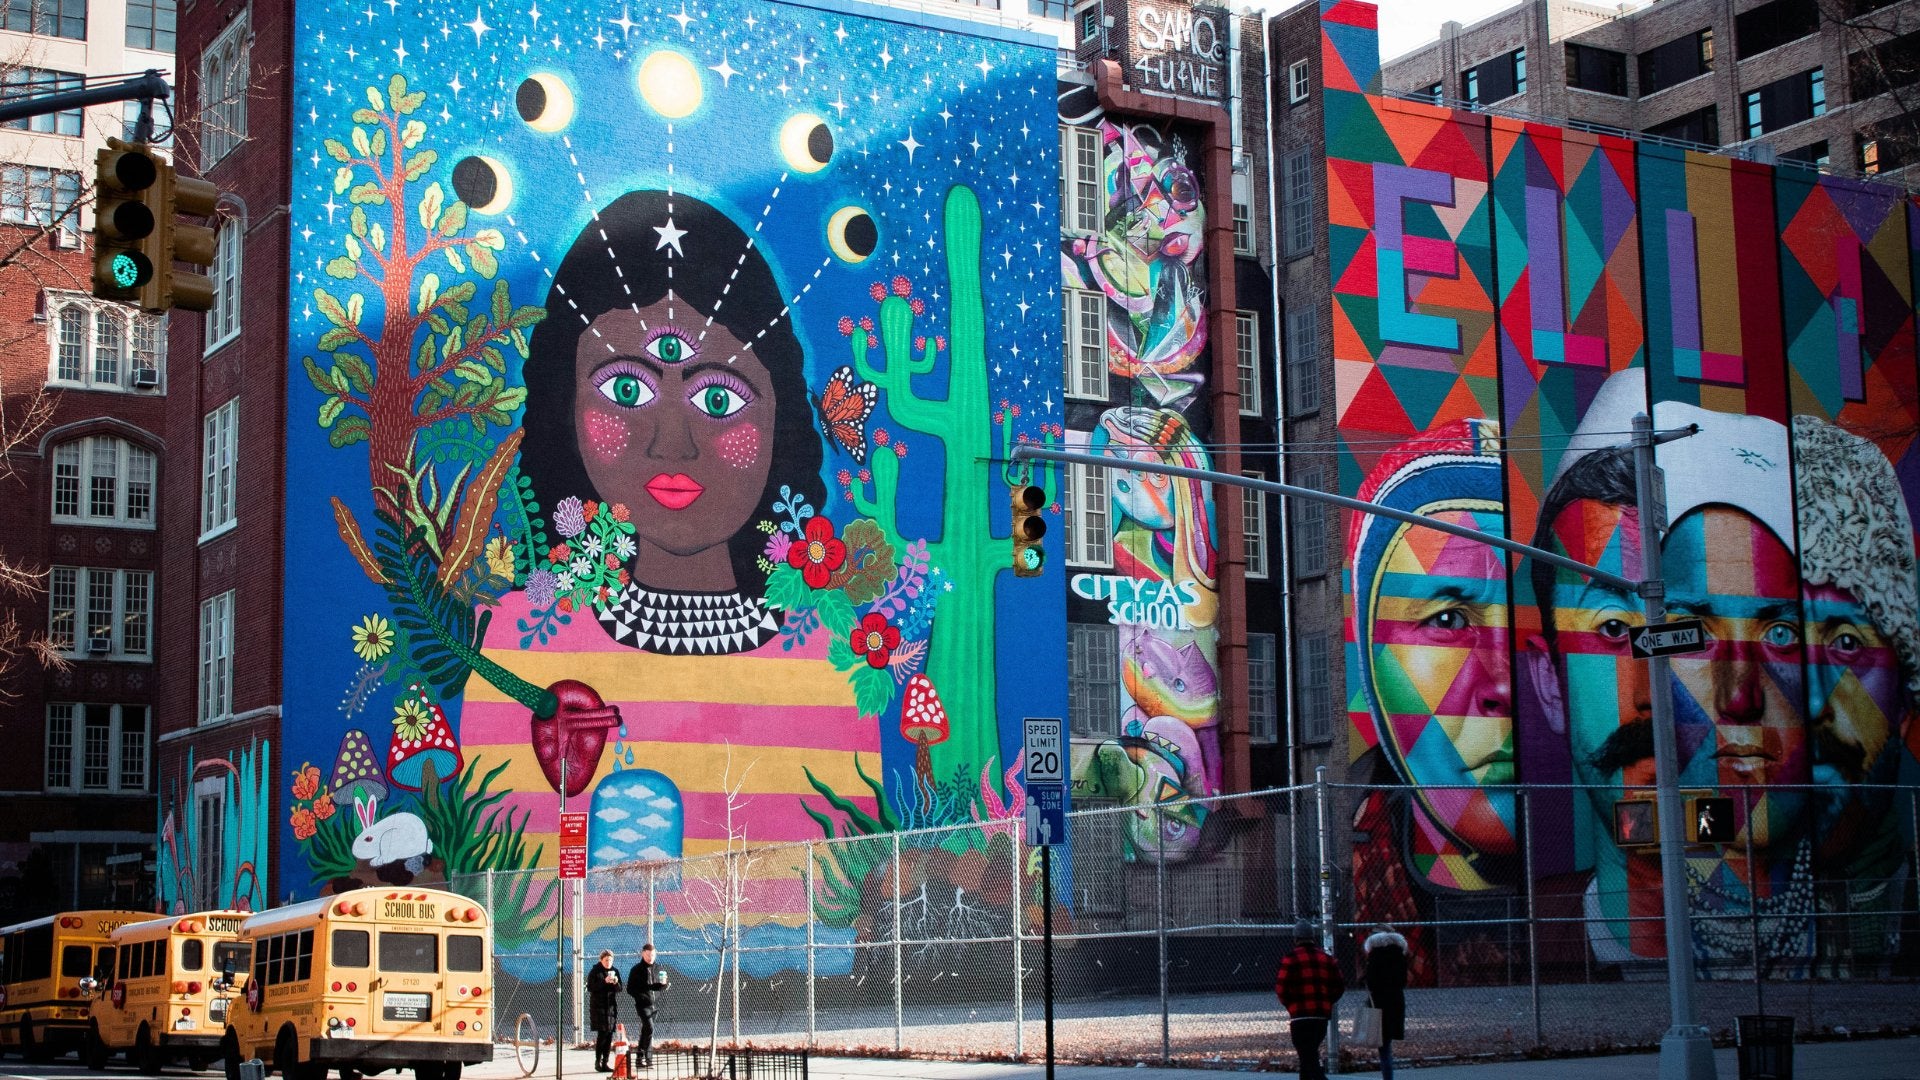 Top 10 Street Art Cities in the USA - The Trendy Art